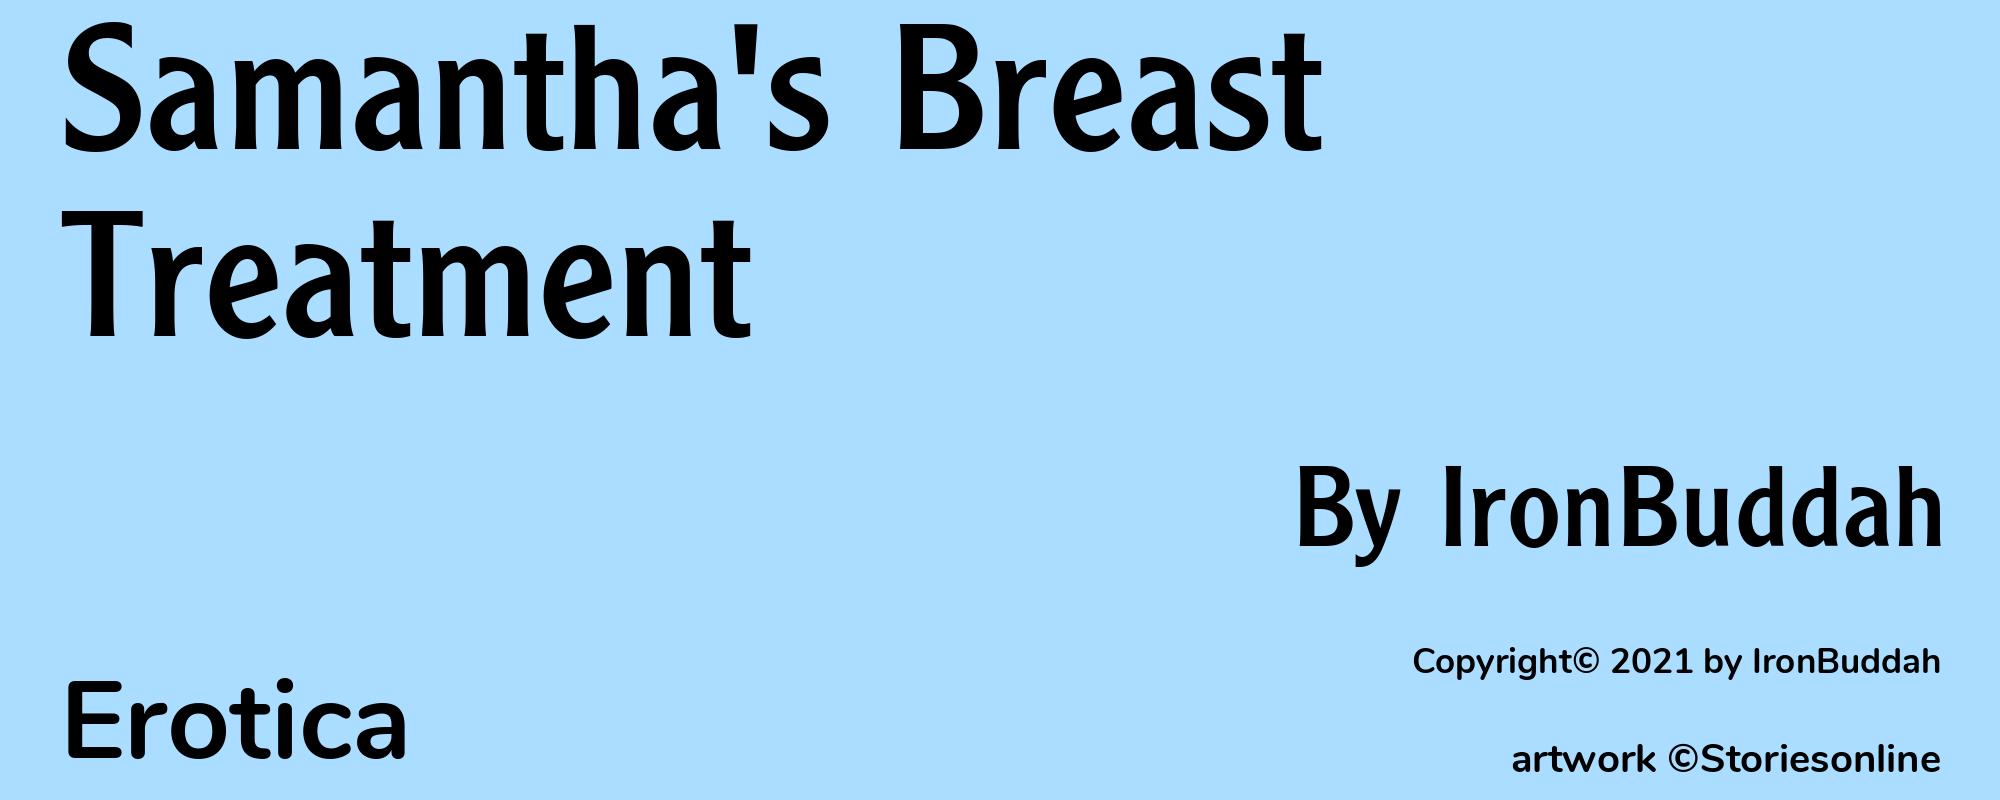 Samantha's Breast Treatment - Cover